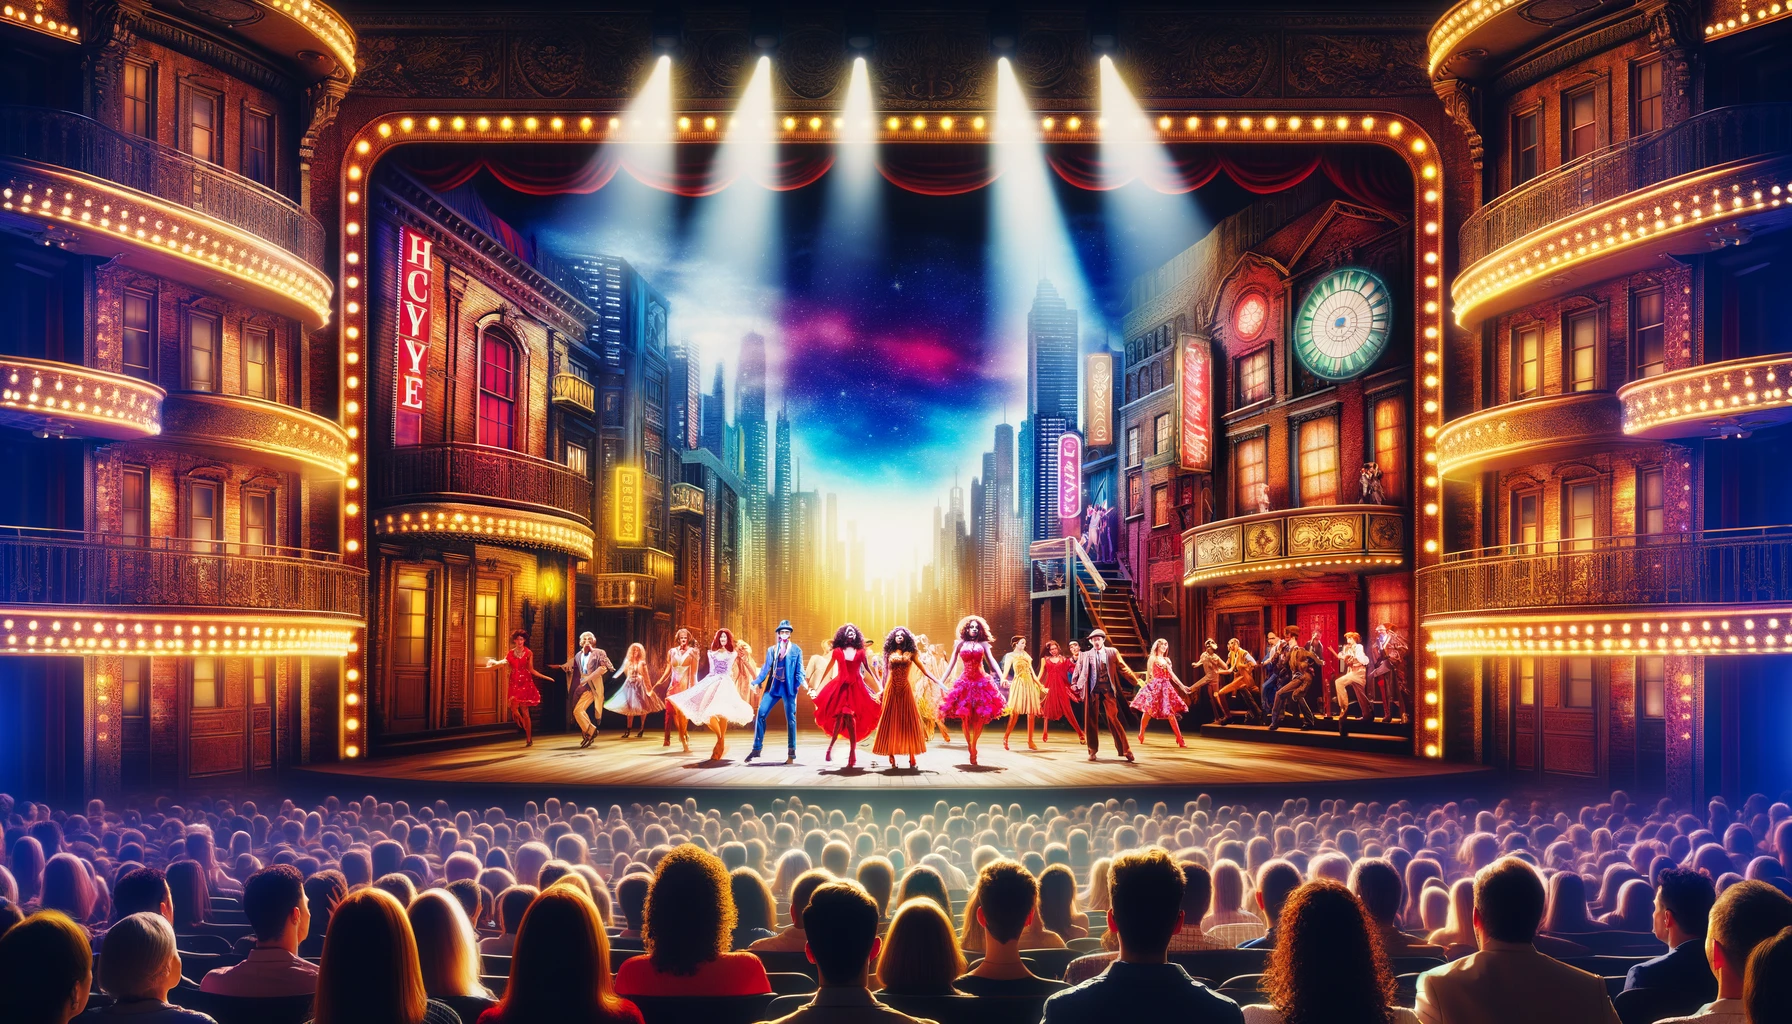 A vibrant Broadway show scene with an elaborate stage set, bright lighting, and a diverse cast in mid-performance. The audience is captivated, enjoying the show with enthusiasm. The atmosphere is electric, highlighting the energy and excitement of a live Broadway musical.